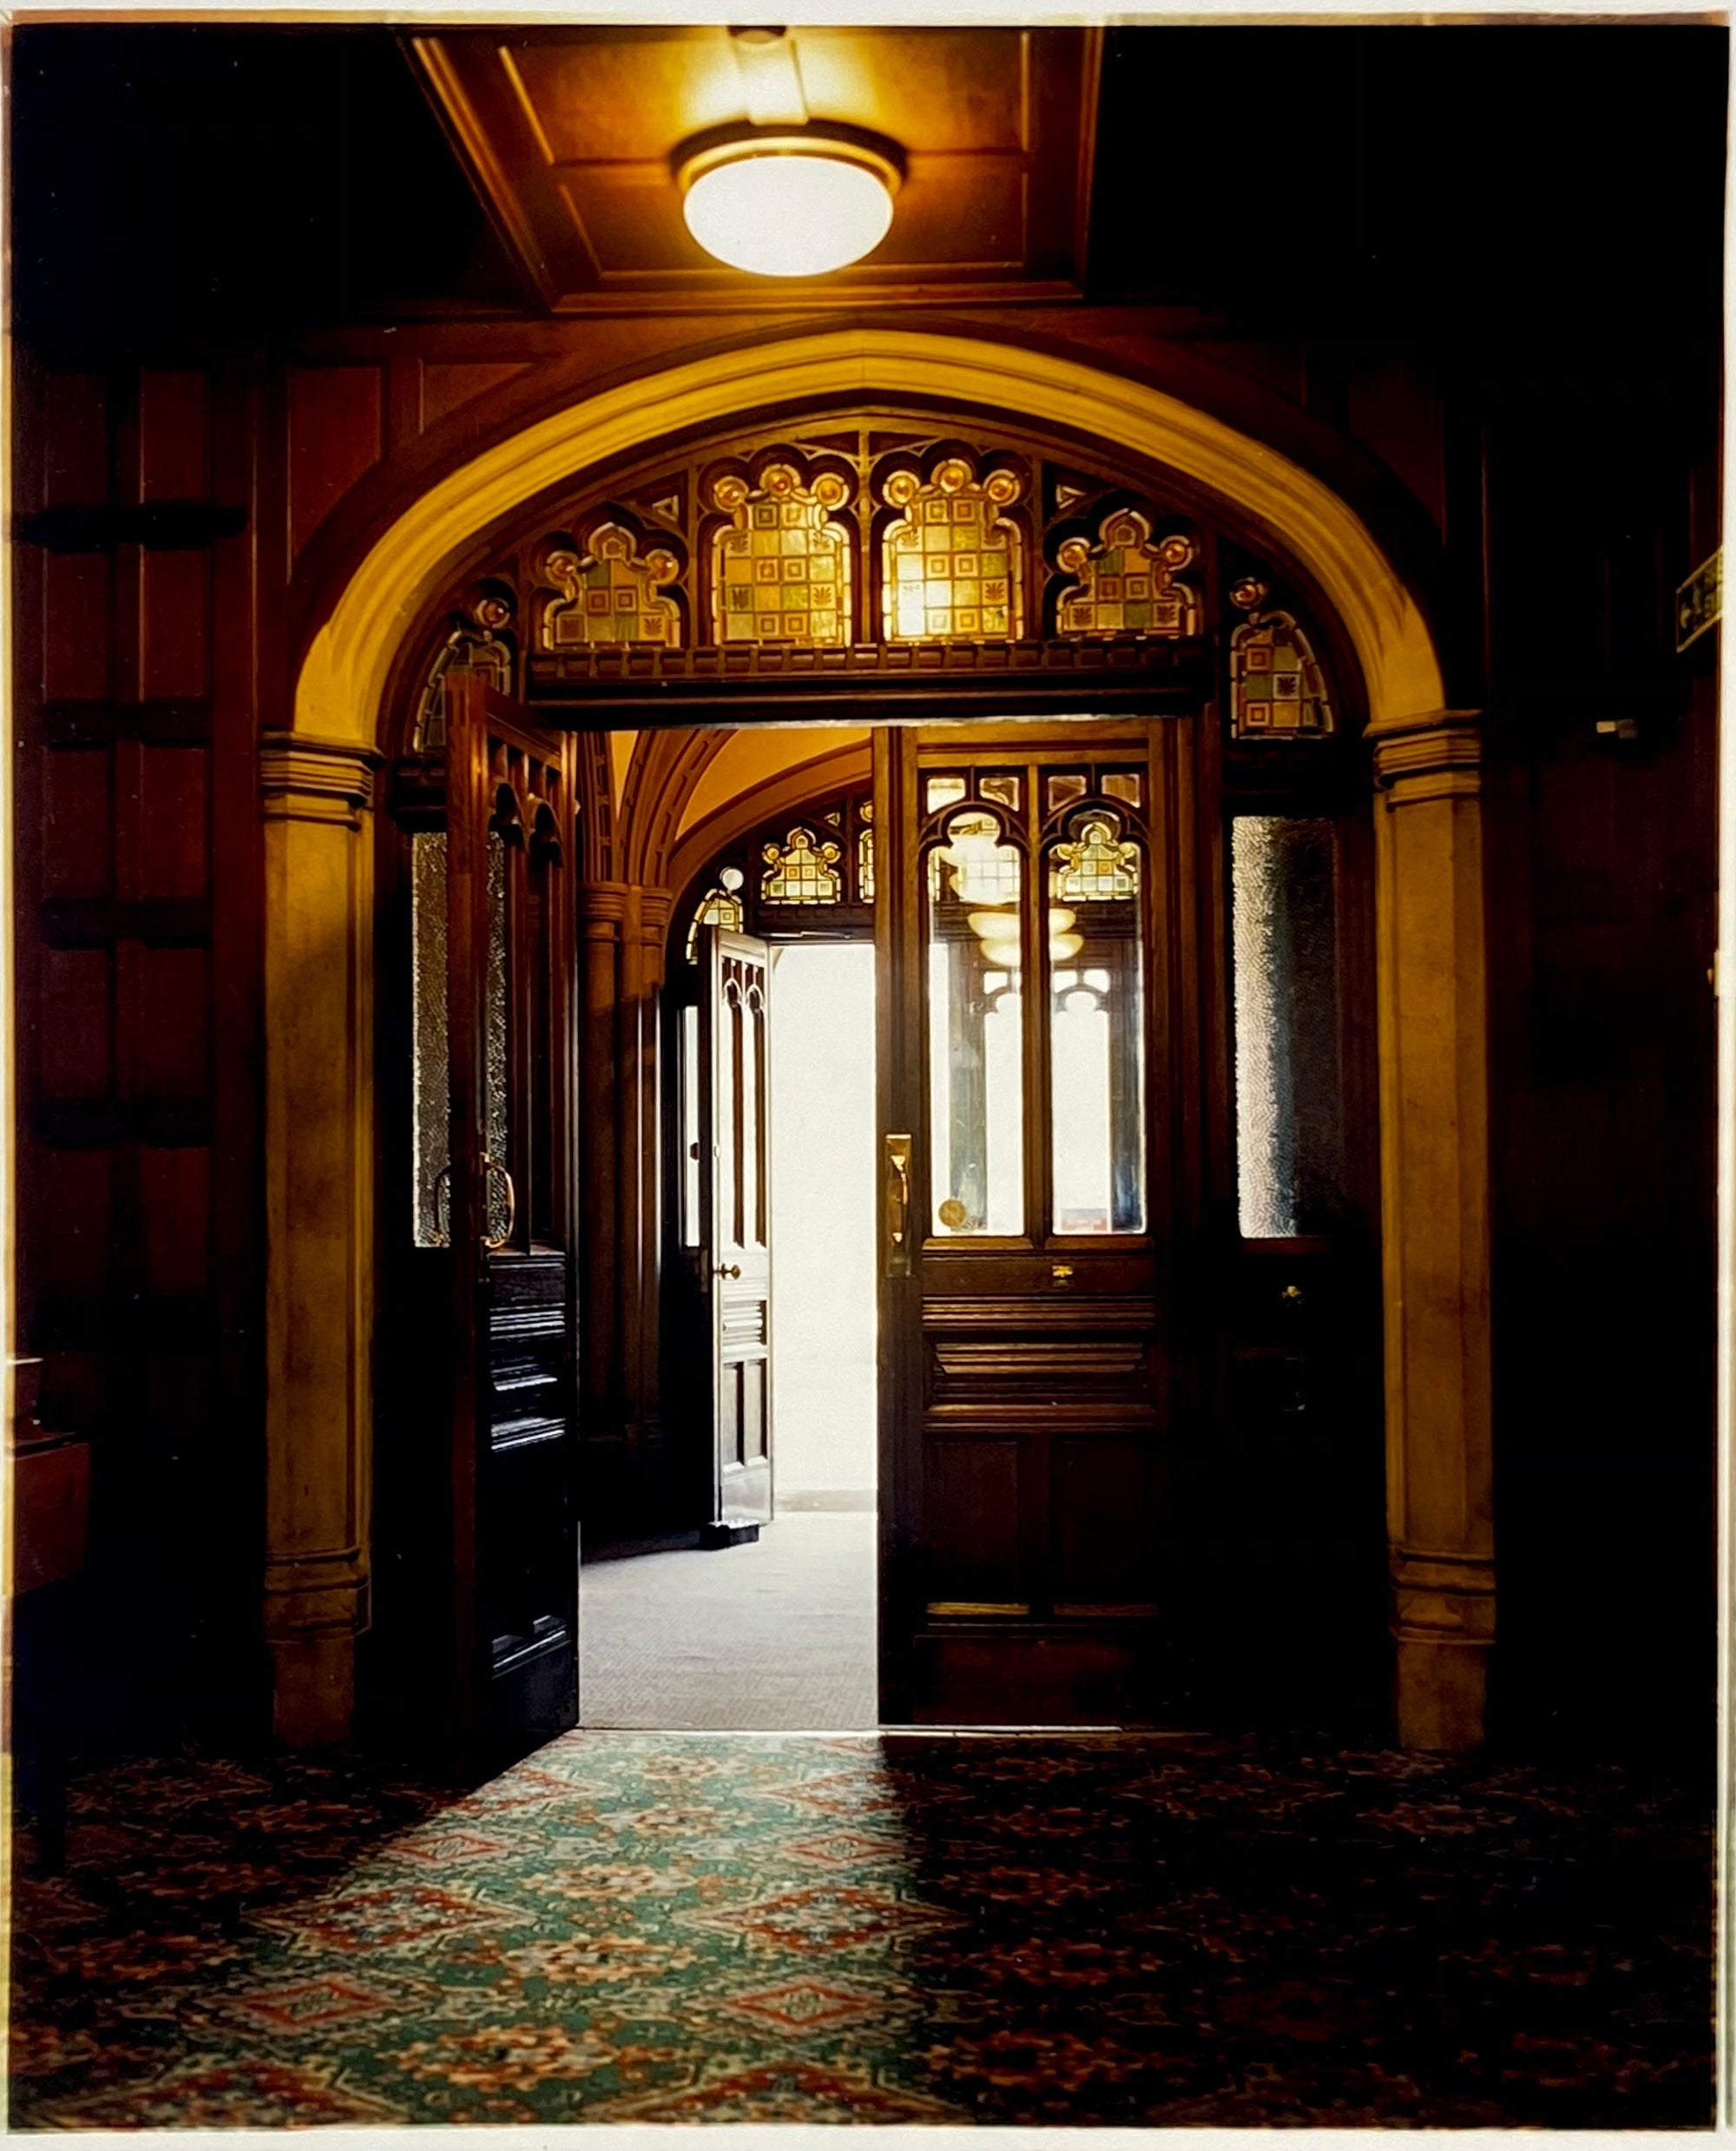 Bletchley Park entrance. Interior photography of a wooden panelled room with patterned carpet, stained glass and a warm light.